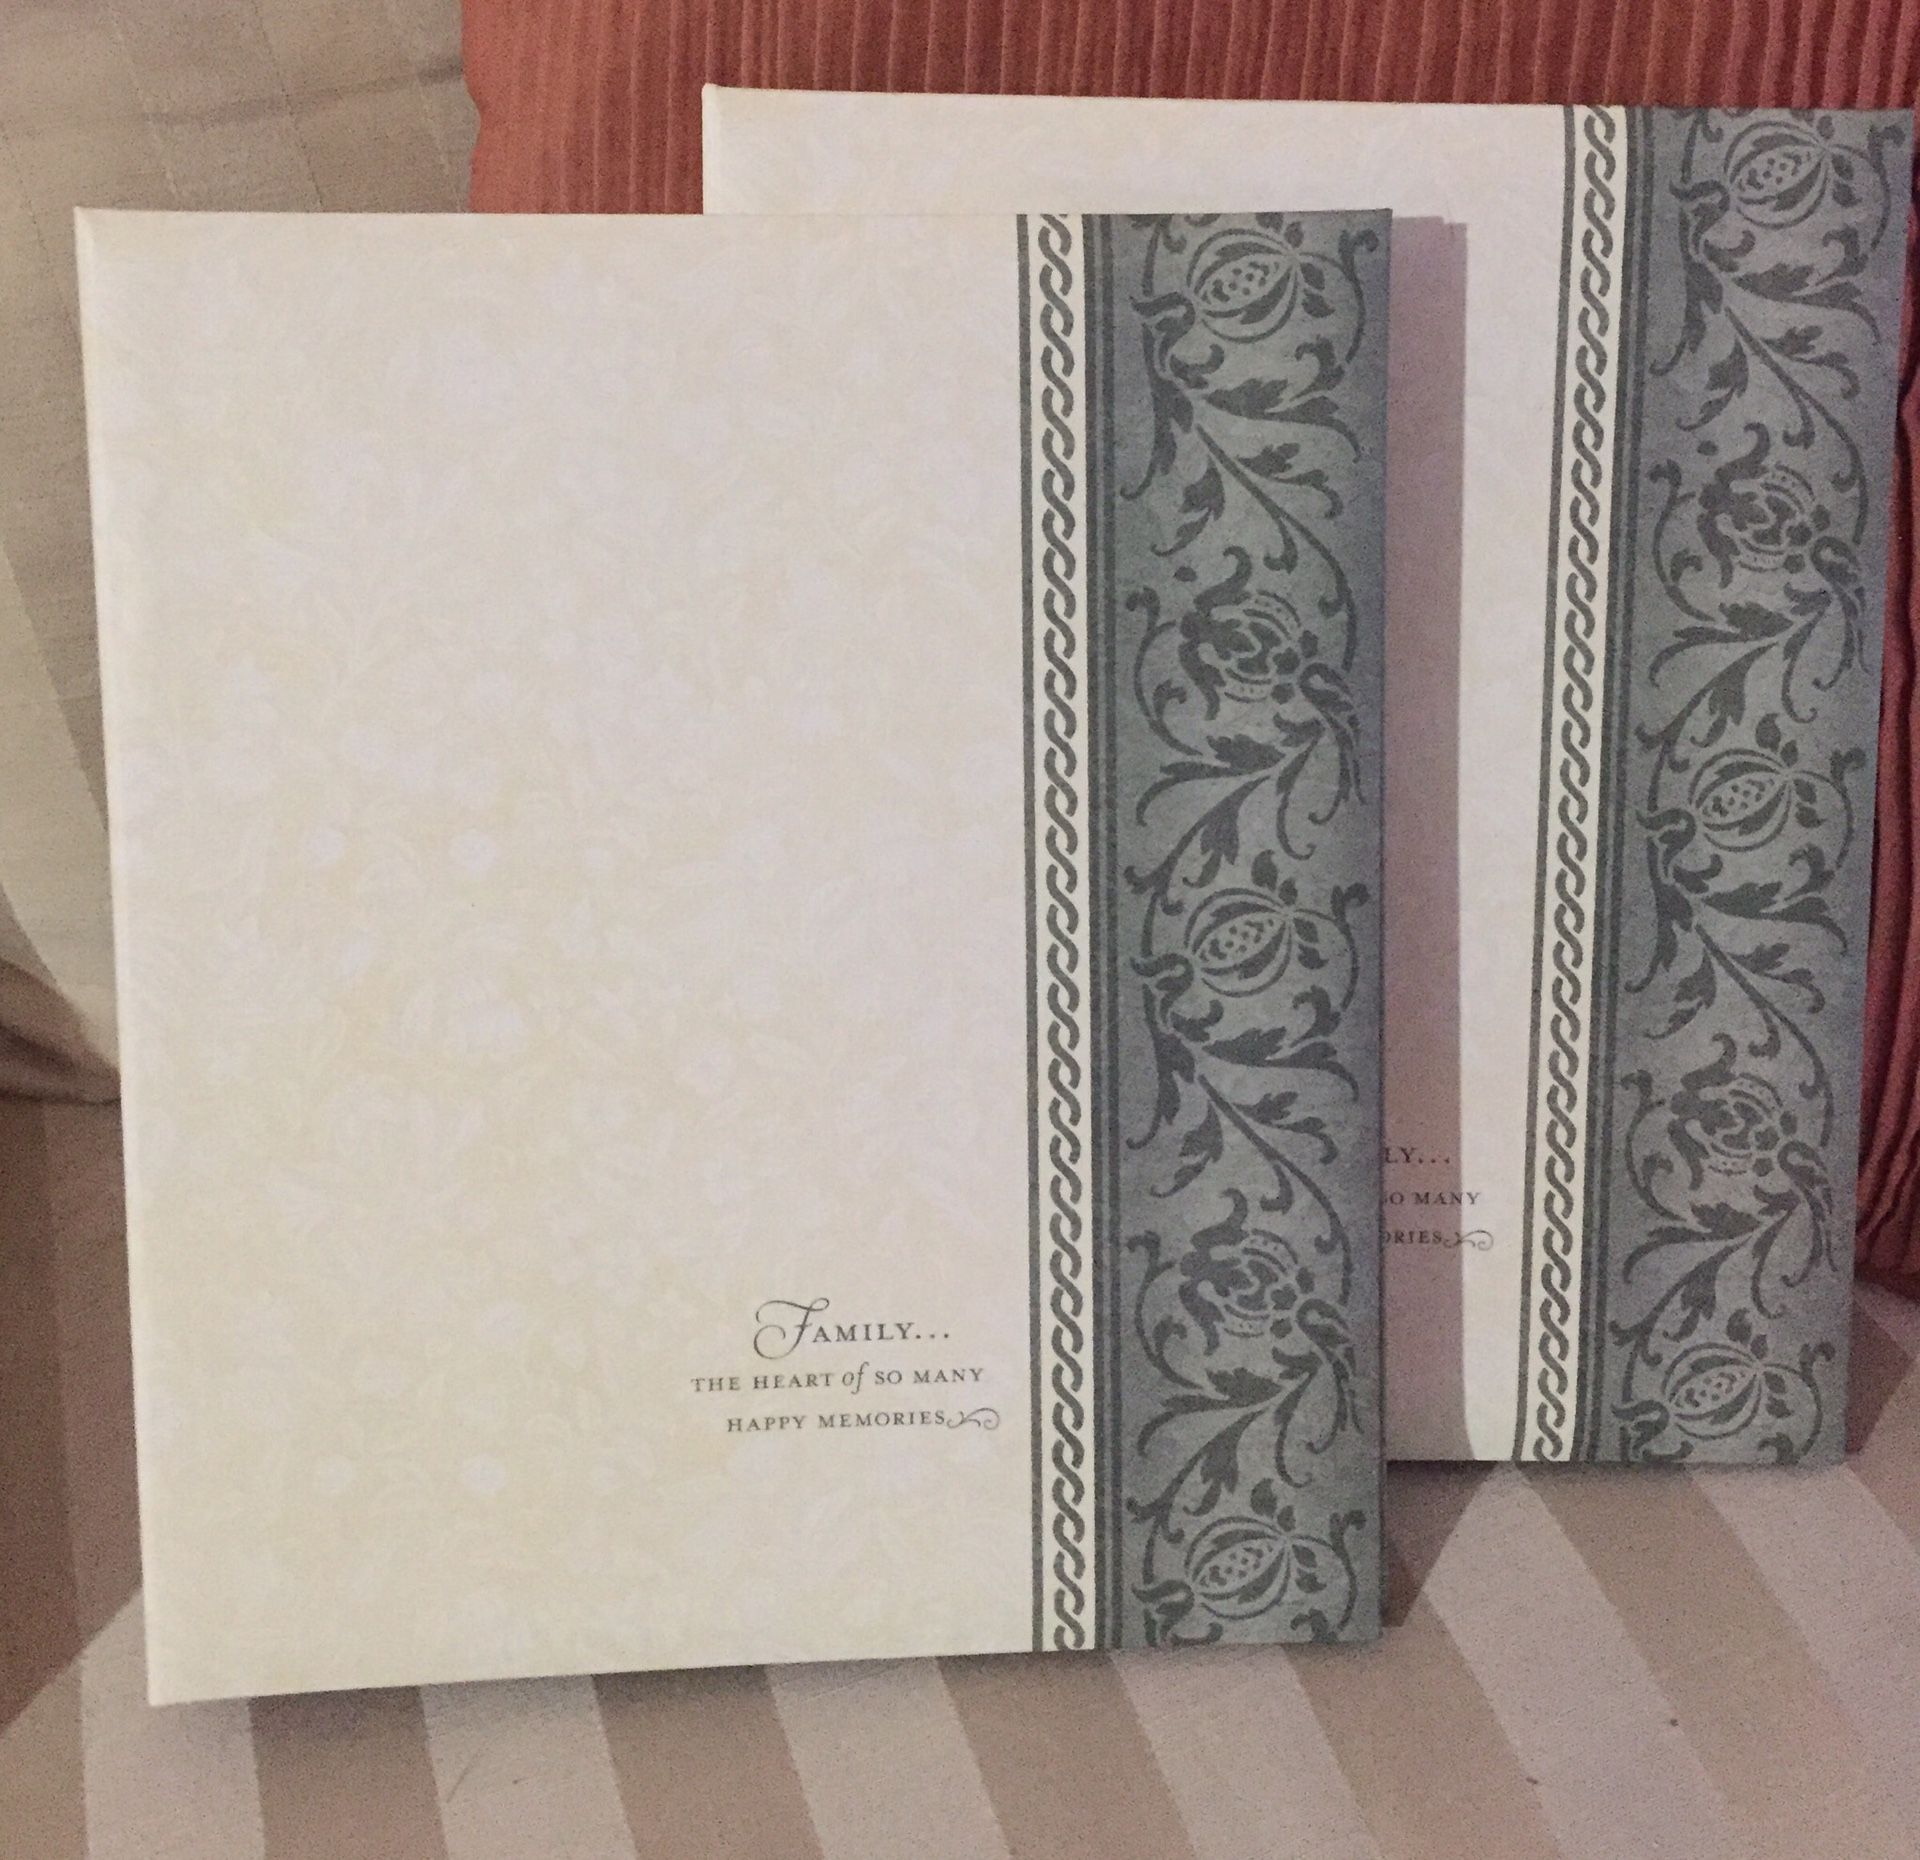 New Hallmark Photo Albums Family the Heart of Many Memories Wedding scrapbooks Books Set Gift Memory Memories Pictures Pages